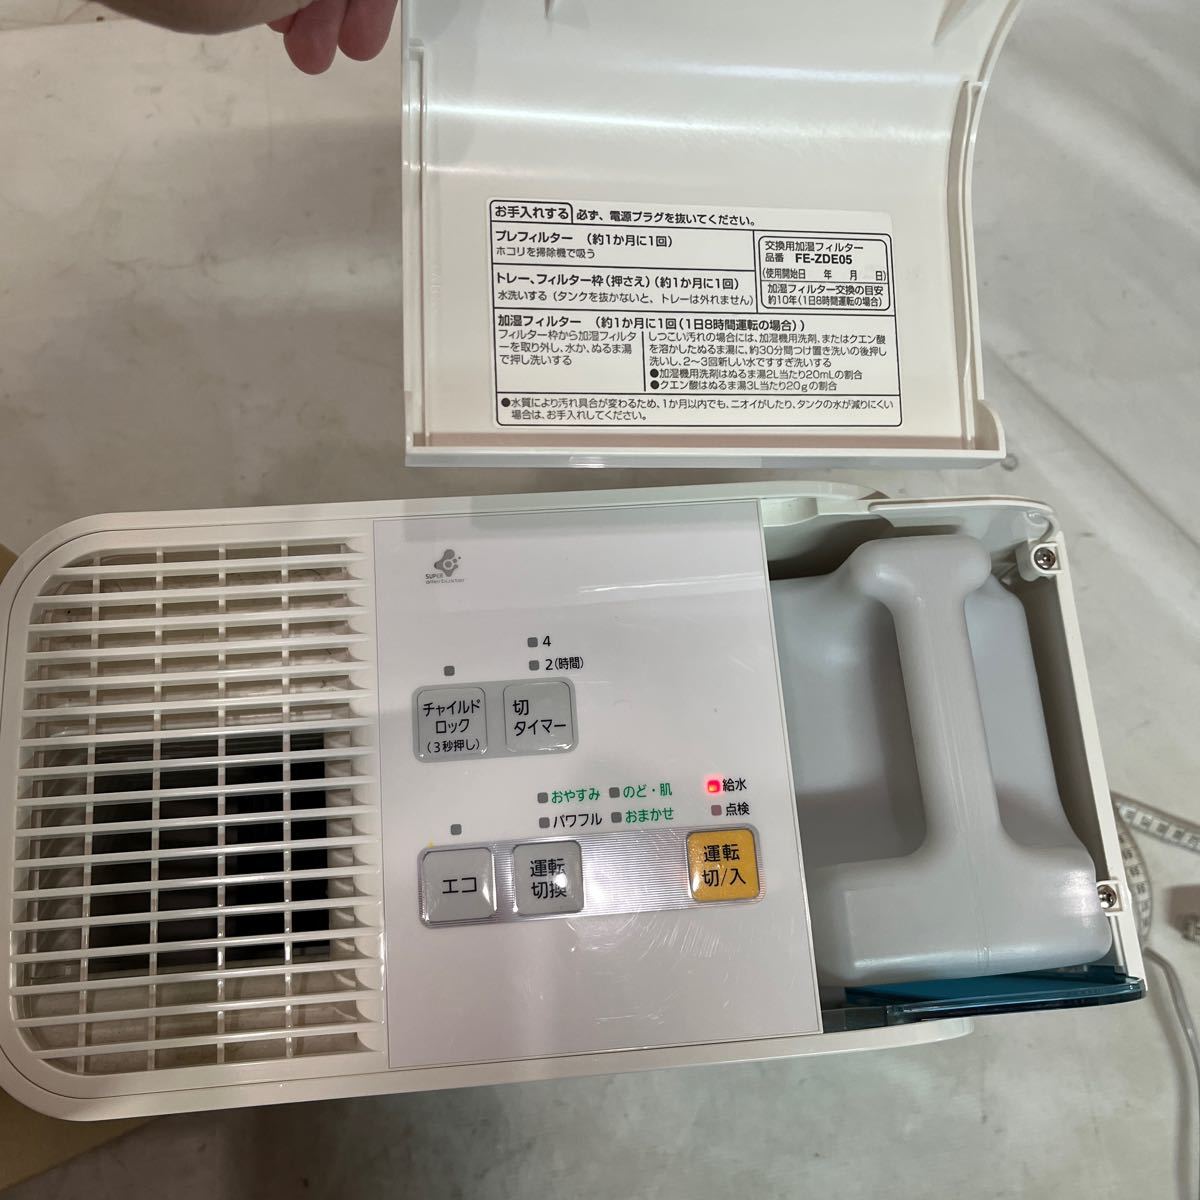 [ junk ]Panasonic heating evaporation type humidifier FE-KLE05.2009 year made. box size approximately 109 centimeter 